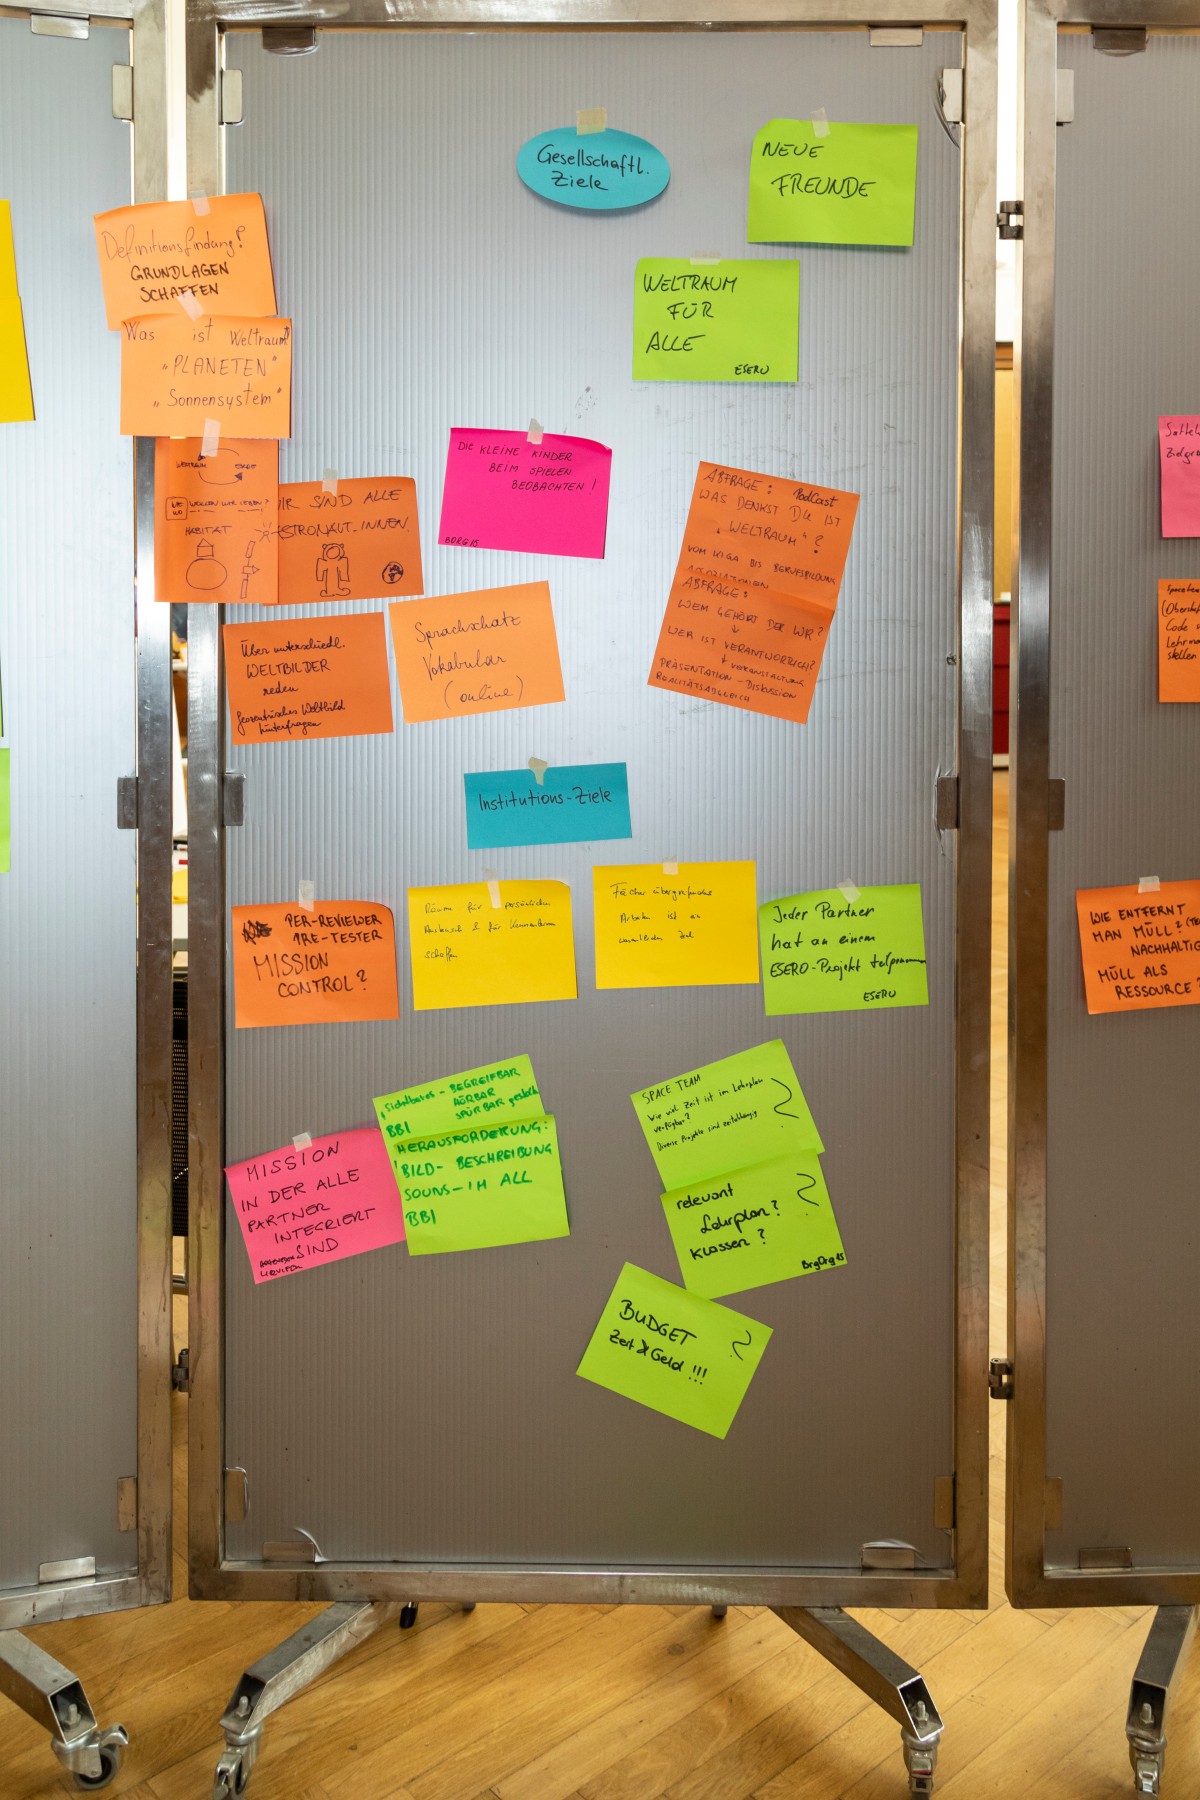 Board with post-its with collection of ideas of social and institutional goals